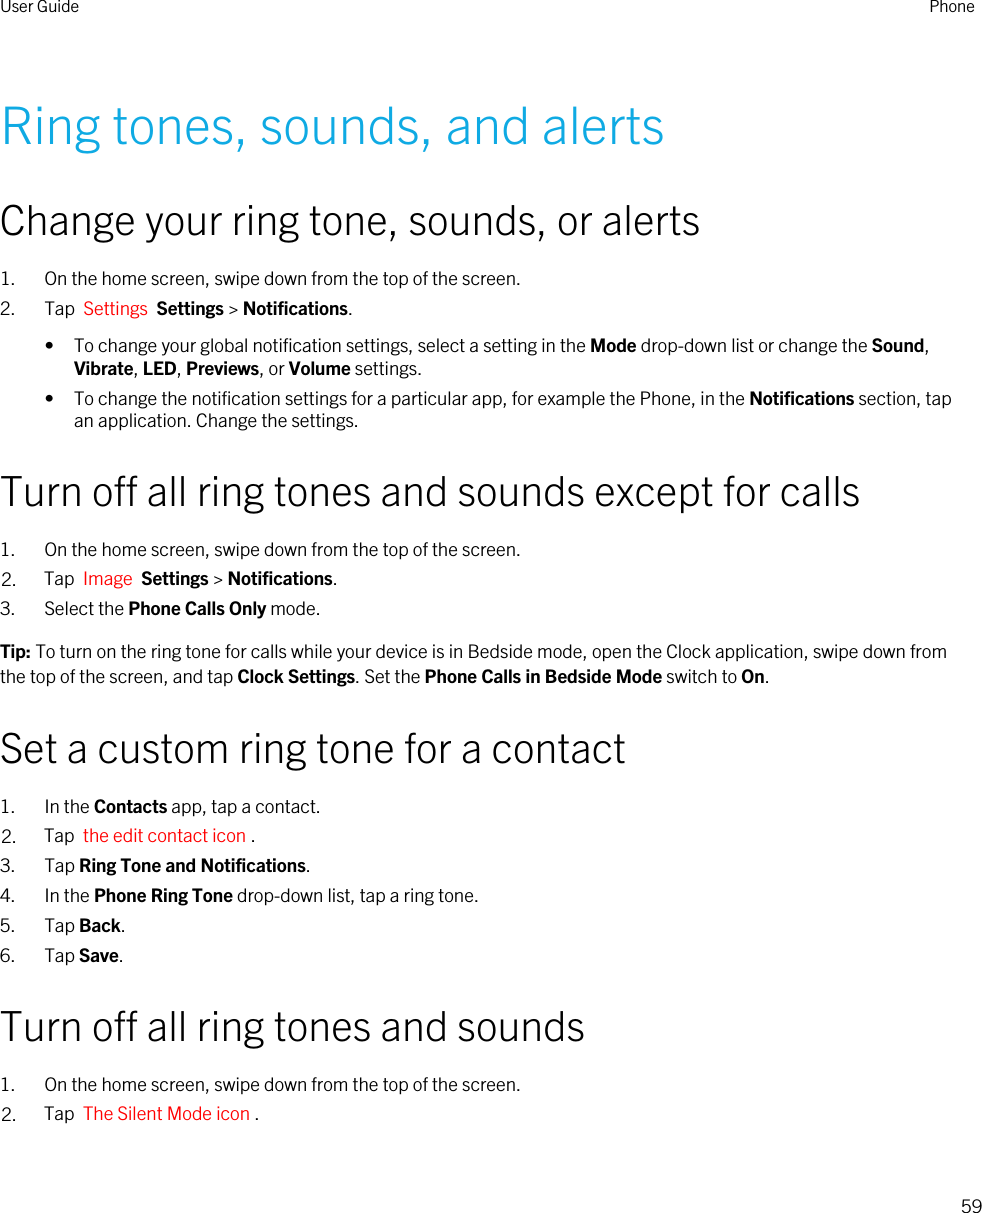 Ring tones, sounds, and alertsChange your ring tone, sounds, or alerts1. On the home screen, swipe down from the top of the screen.2. Tap  Settings  Settings &gt; Notifications.• To change your global notification settings, select a setting in the Mode drop-down list or change the Sound, Vibrate, LED, Previews, or Volume settings.• To change the notification settings for a particular app, for example the Phone, in the Notifications section, tap an application. Change the settings.Turn off all ring tones and sounds except for calls1. On the home screen, swipe down from the top of the screen.2. Tap  Image  Settings &gt; Notifications.3. Select the Phone Calls Only mode.Tip: To turn on the ring tone for calls while your device is in Bedside mode, open the Clock application, swipe down from the top of the screen, and tap Clock Settings. Set the Phone Calls in Bedside Mode switch to On.Set a custom ring tone for a contact1. In the Contacts app, tap a contact.2. Tap  the edit contact icon .3. Tap Ring Tone and Notifications.4. In the Phone Ring Tone drop-down list, tap a ring tone.5. Tap Back.6. Tap Save.Turn off all ring tones and sounds1. On the home screen, swipe down from the top of the screen.2. Tap  The Silent Mode icon .User Guide Phone59